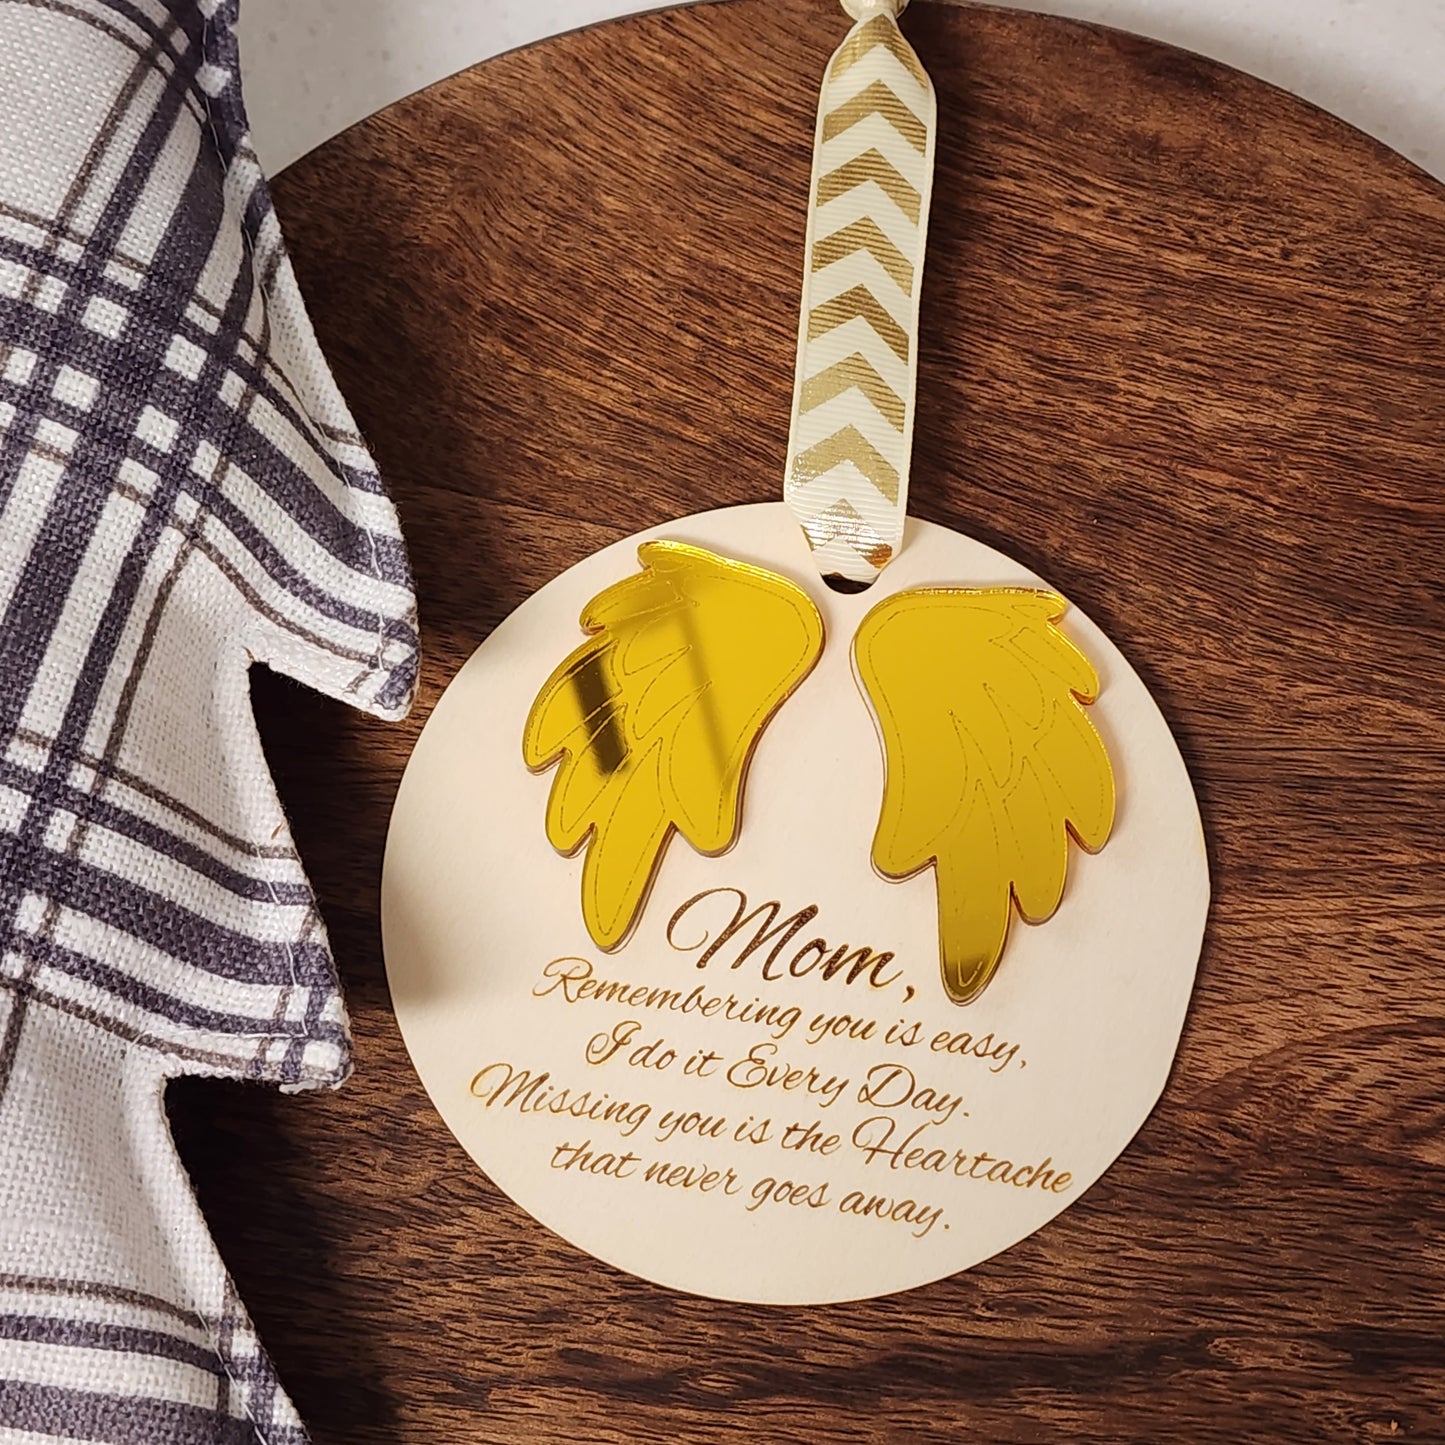 🎄 Personalized Missing You Ornament 🎄